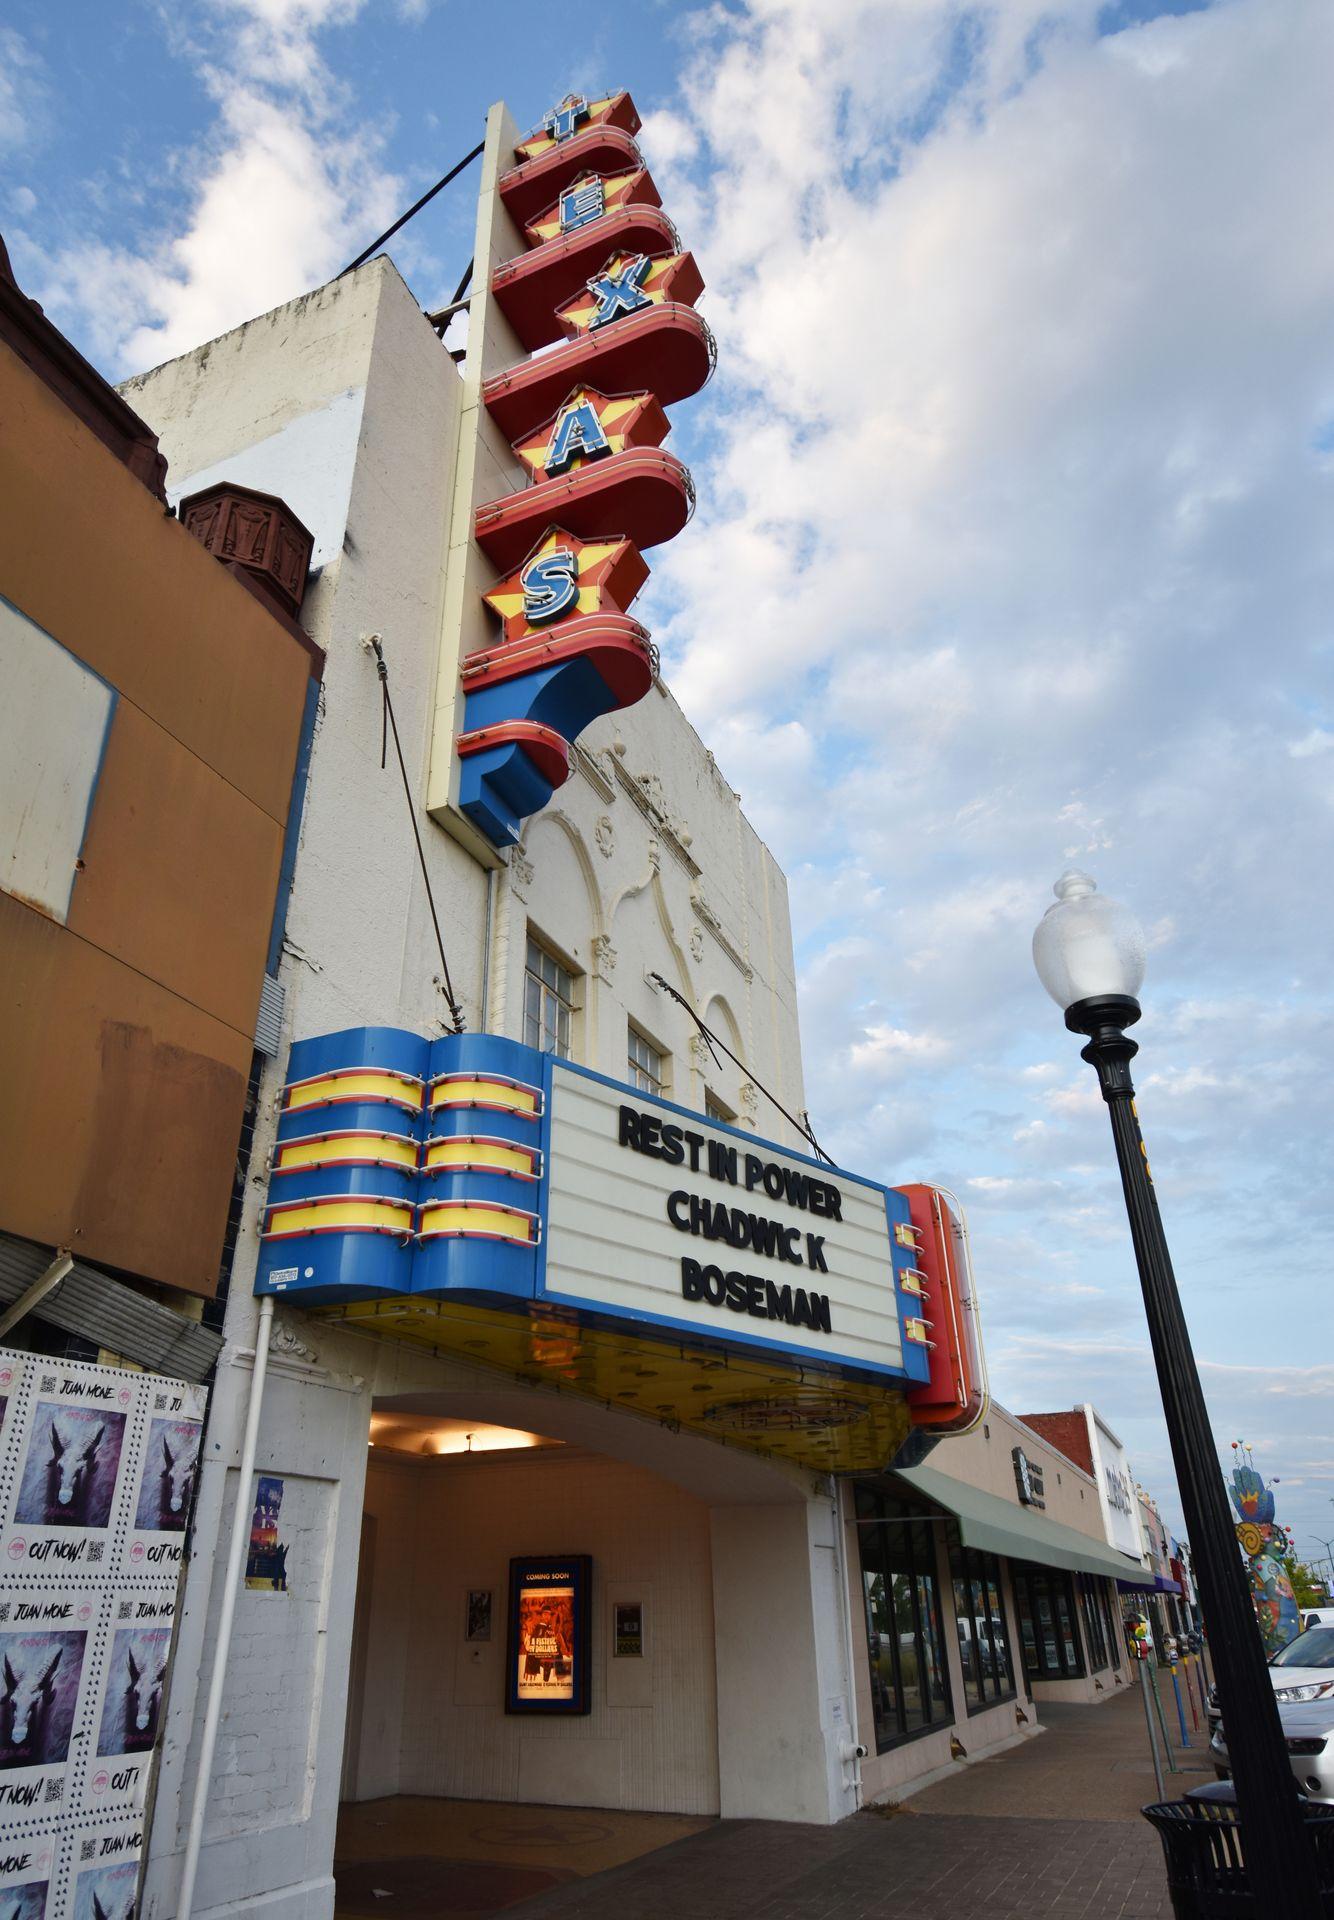 The white Texas Theater with Texas written in colorful letters at the top.